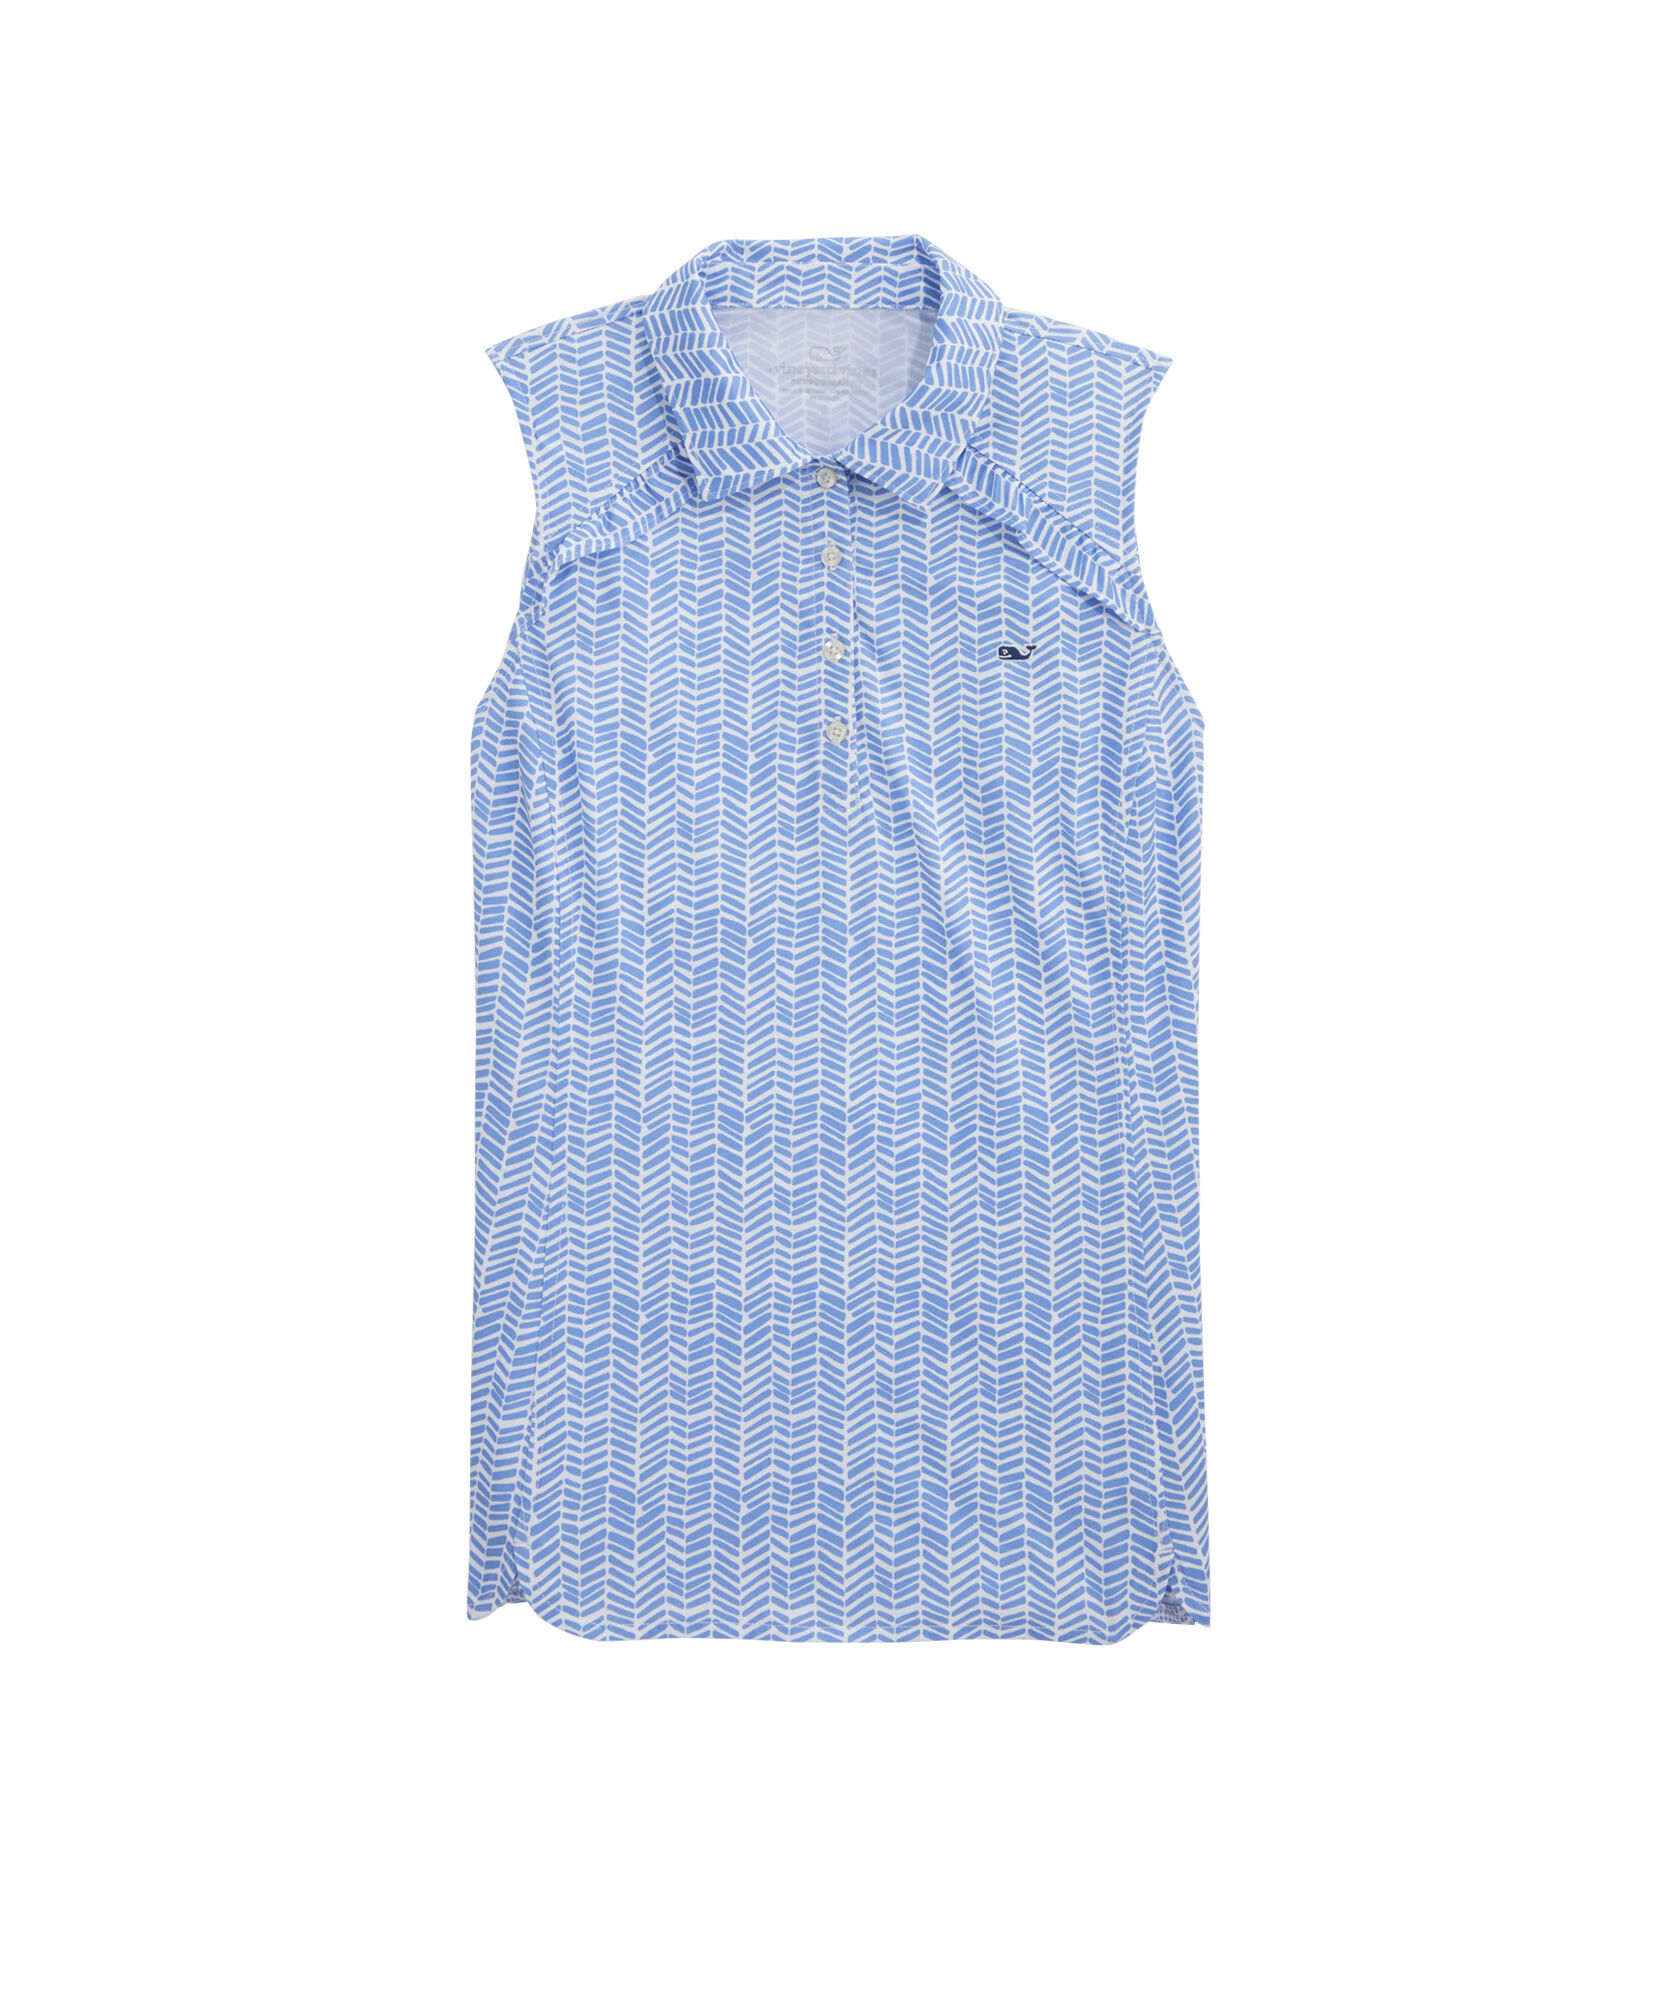 OUTLET Printed Sleeveless Performance Ruffle Polo